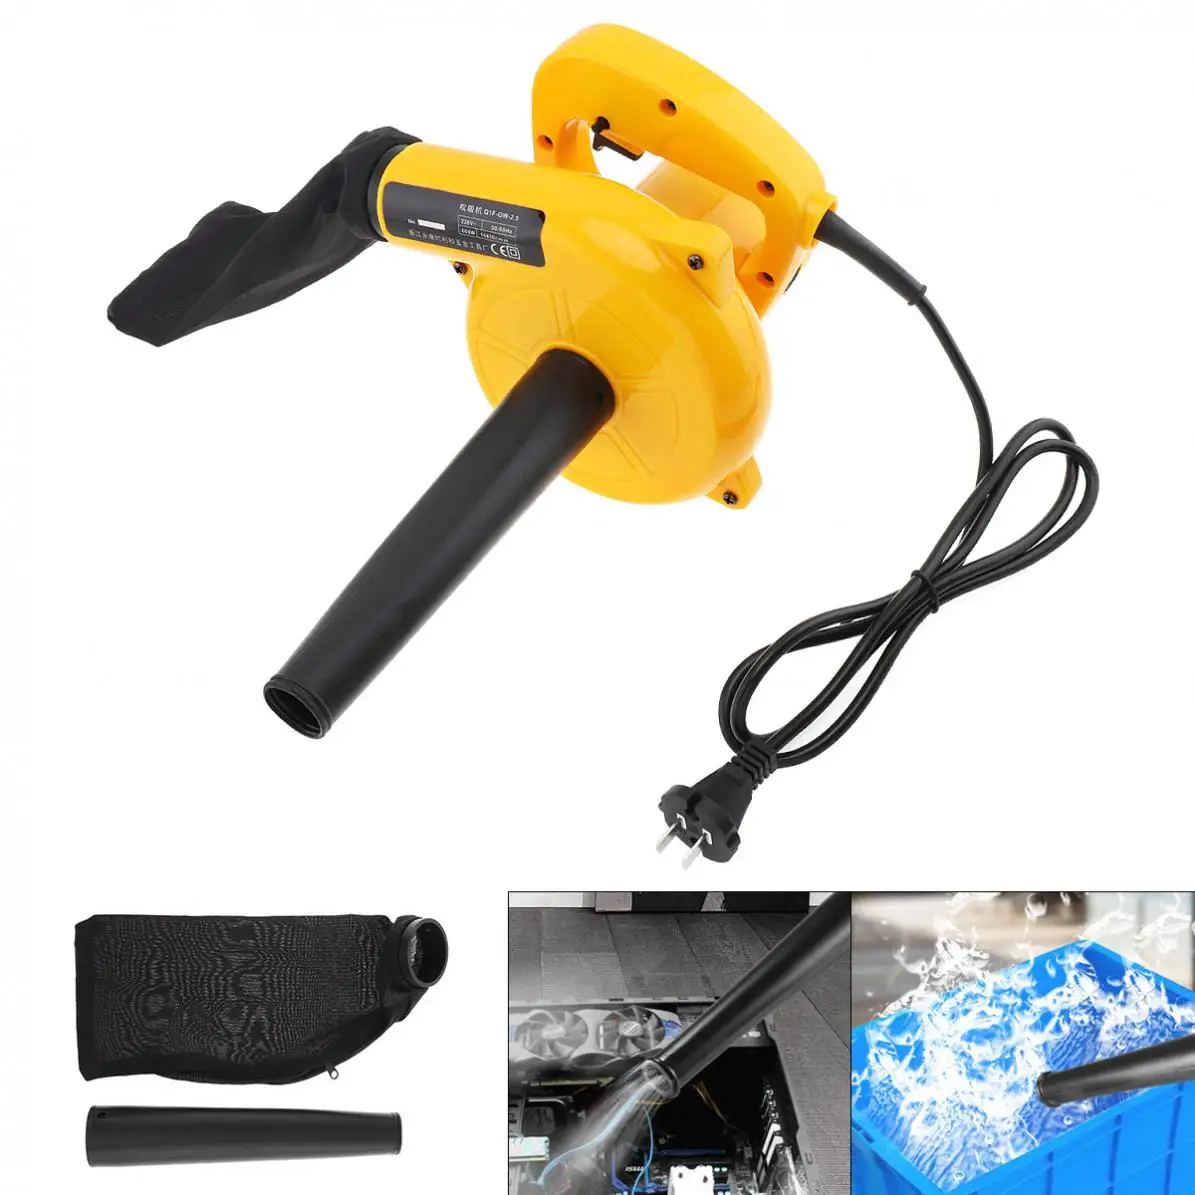 

220V 600W 16000rpm Multifunctional Portable Electric Blower Duster Dust Collector Set with Suction Head and 1.2L Collecting Bag